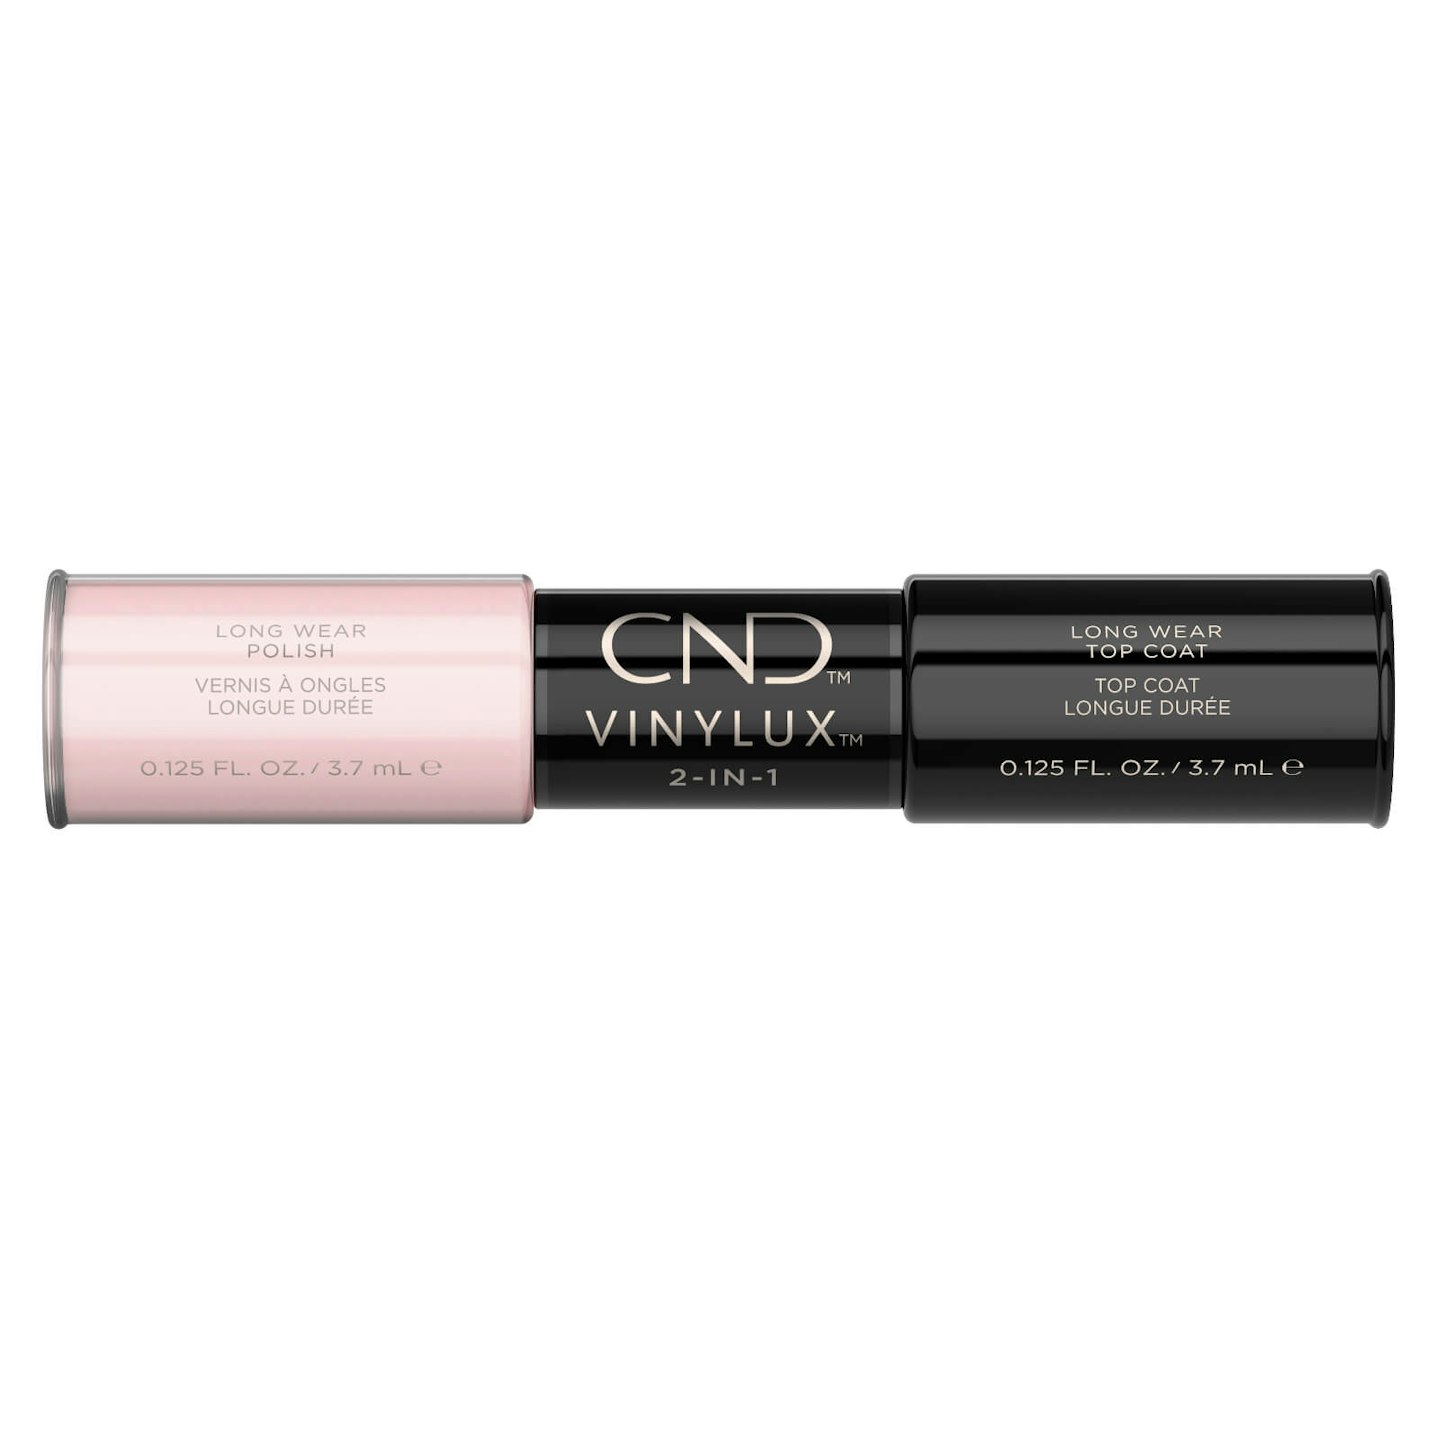 CND Vinylux 2 in 1 in Negligee, £16.95